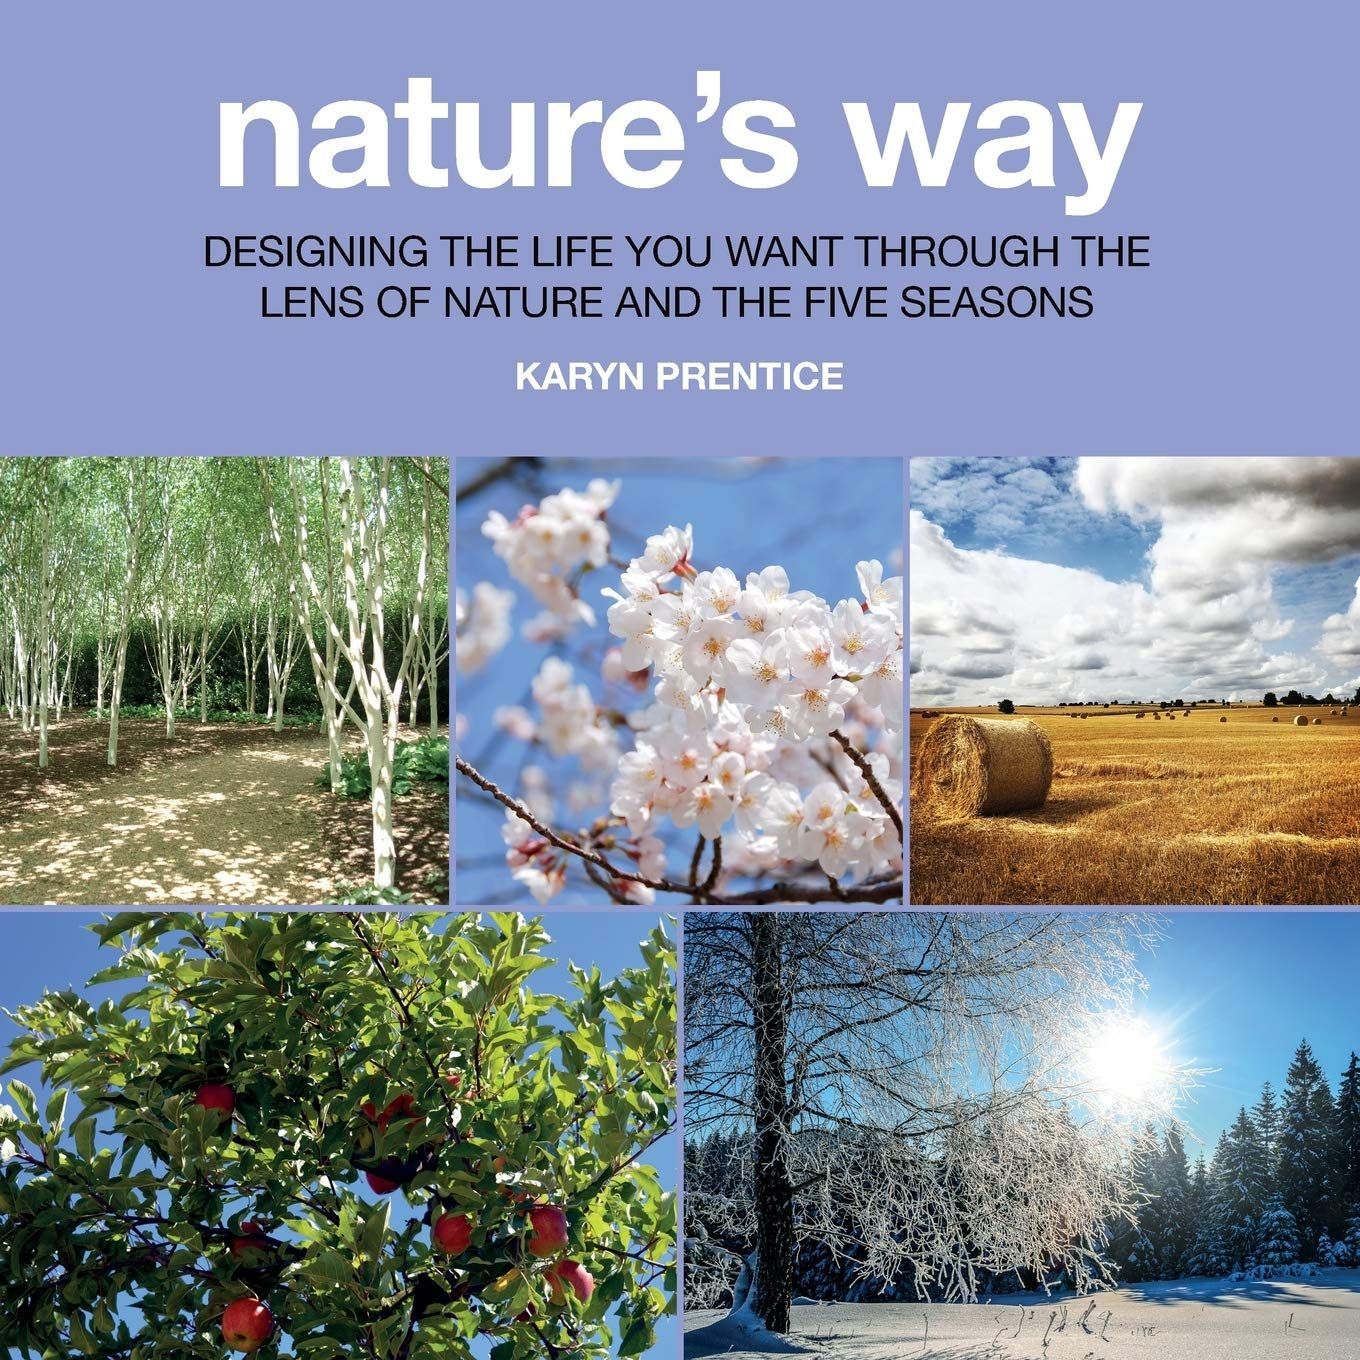 Nature's Way: Nature and the Five Seasons by Karyn Prentice